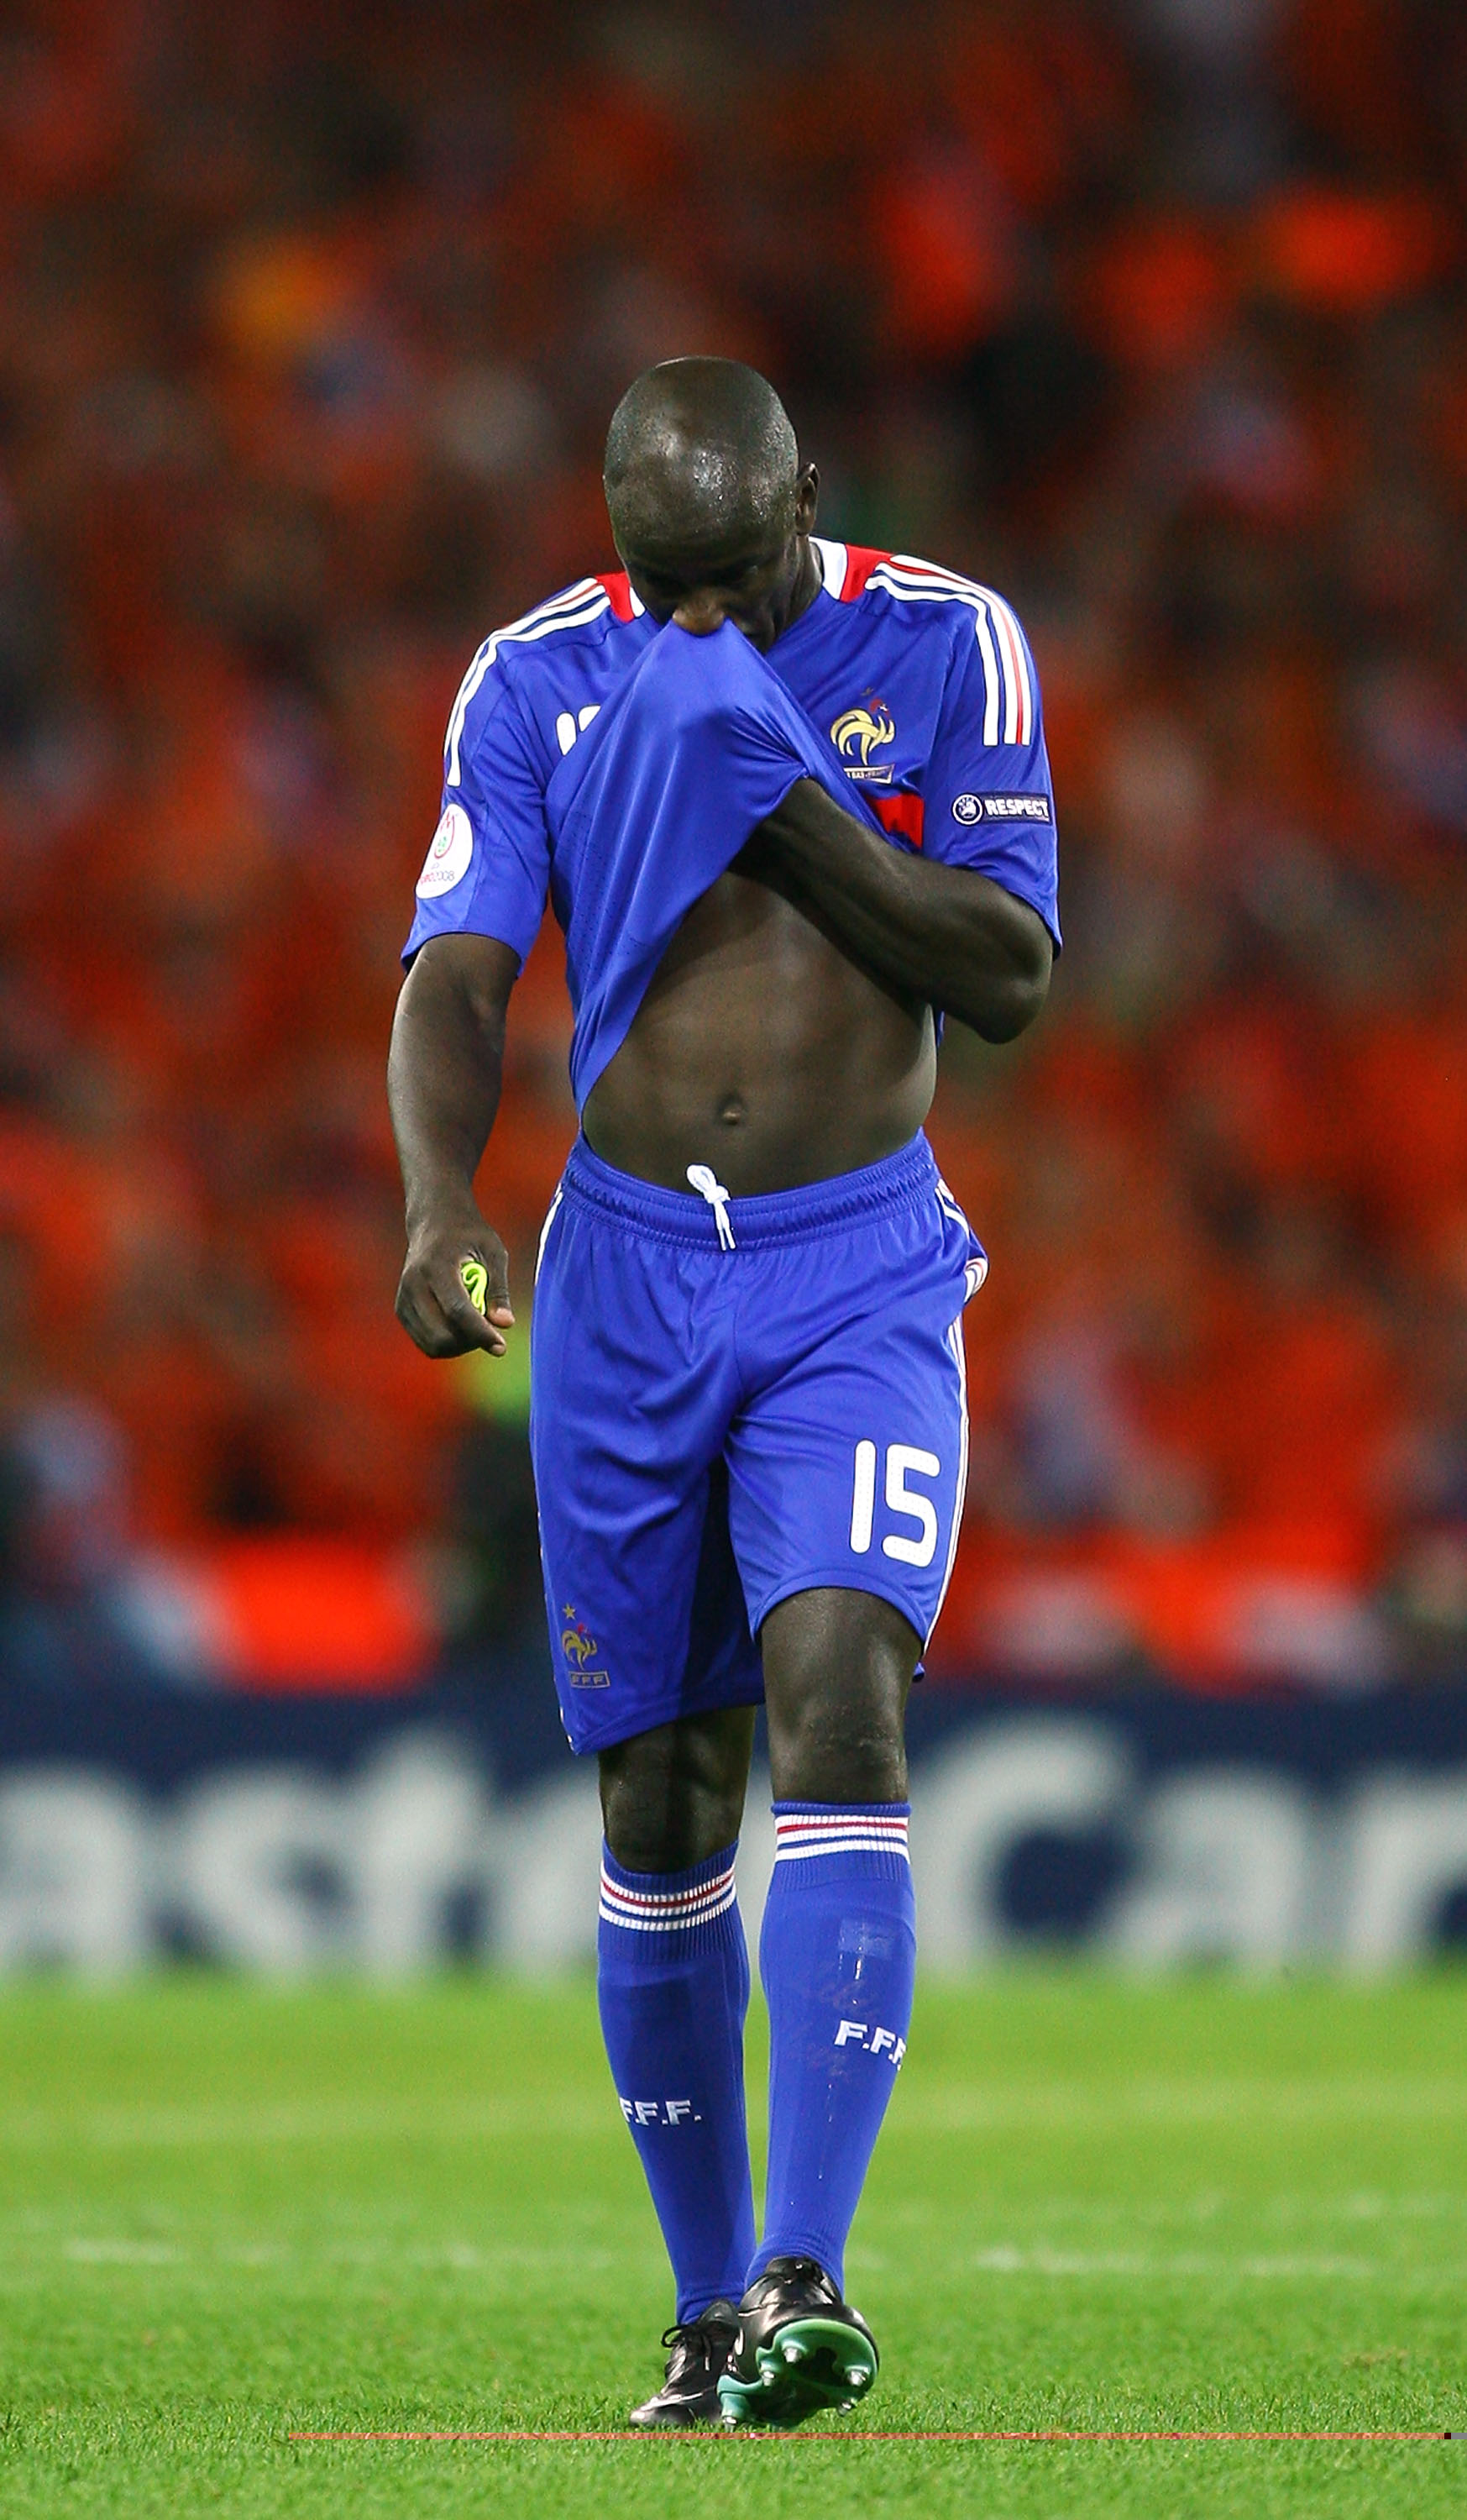 BERNE, SWITZERLAND - JUNE 13: Lilian Thuram of France looks dejected after defeat in the UEFA EURO 2008 Group C match between Netherlands and France at Stade de Suisse Wankdorf on June 13, 2008 in Berne, Switzerland.  (Photo by Bryn Lennon/Getty Images)